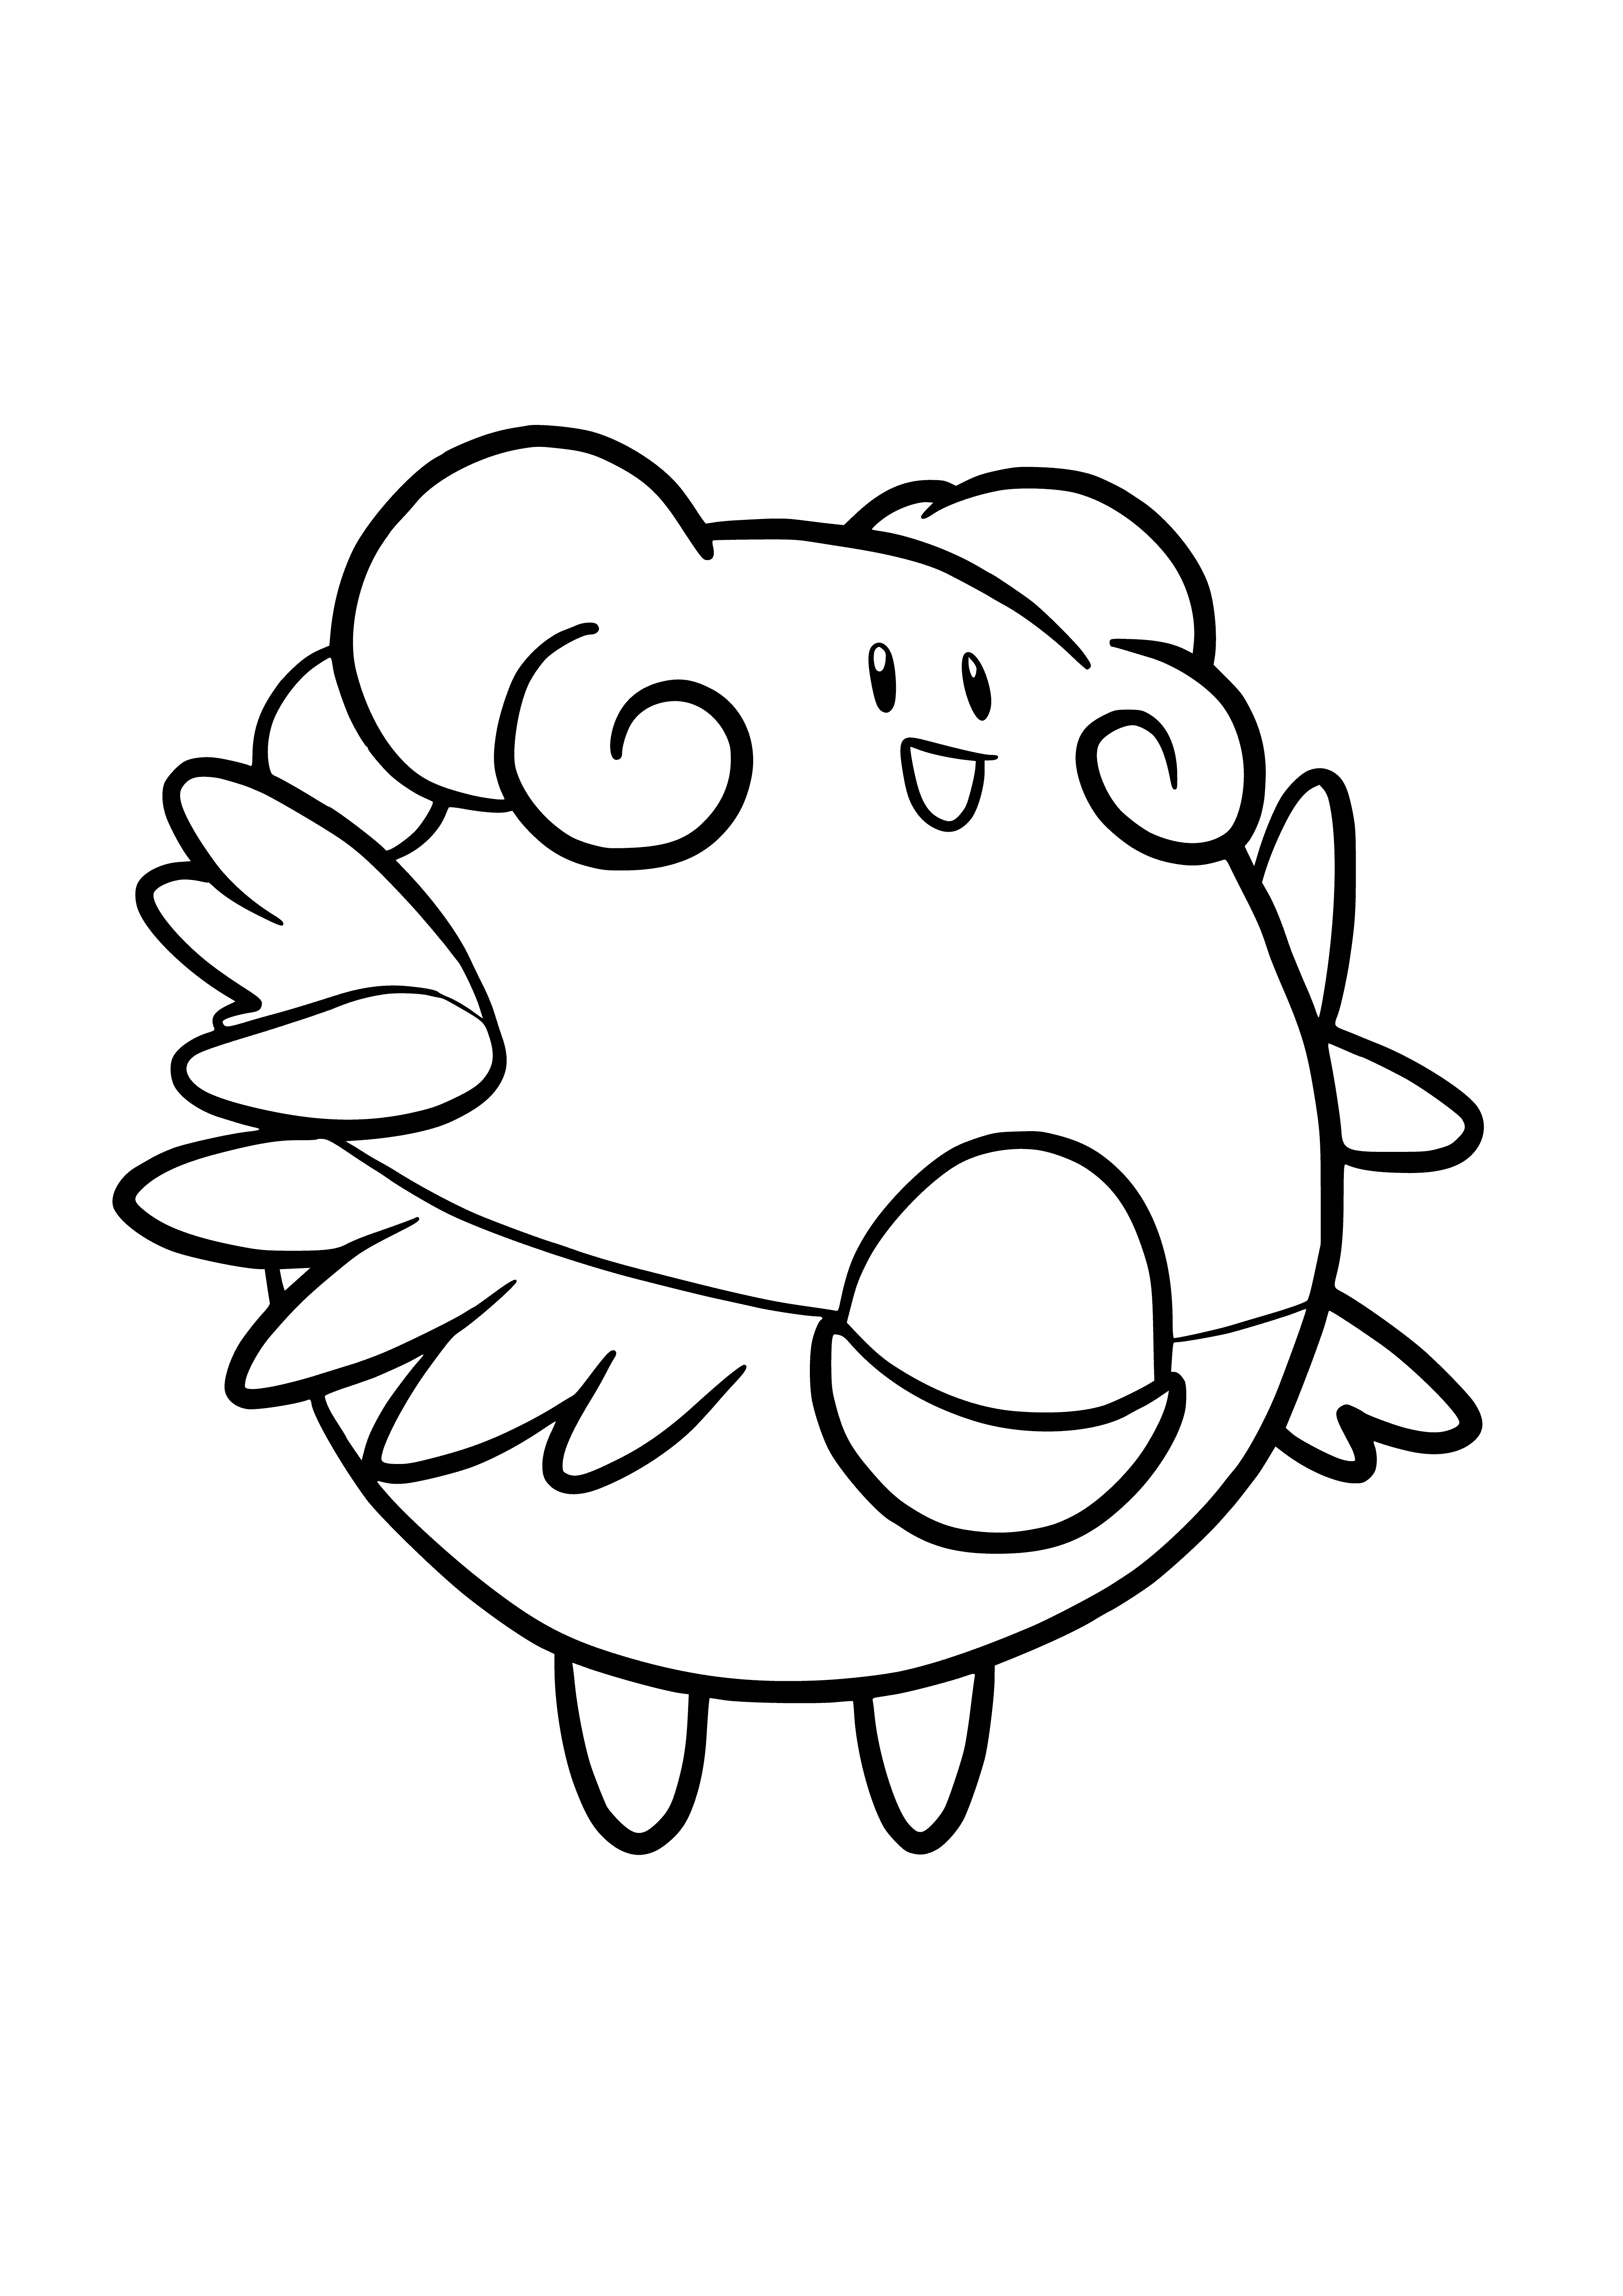 coloring page: Blissey is the "Happiness Pokemon", rarely seen in the wild, they care for injured Pokemon and make treats for their friends.